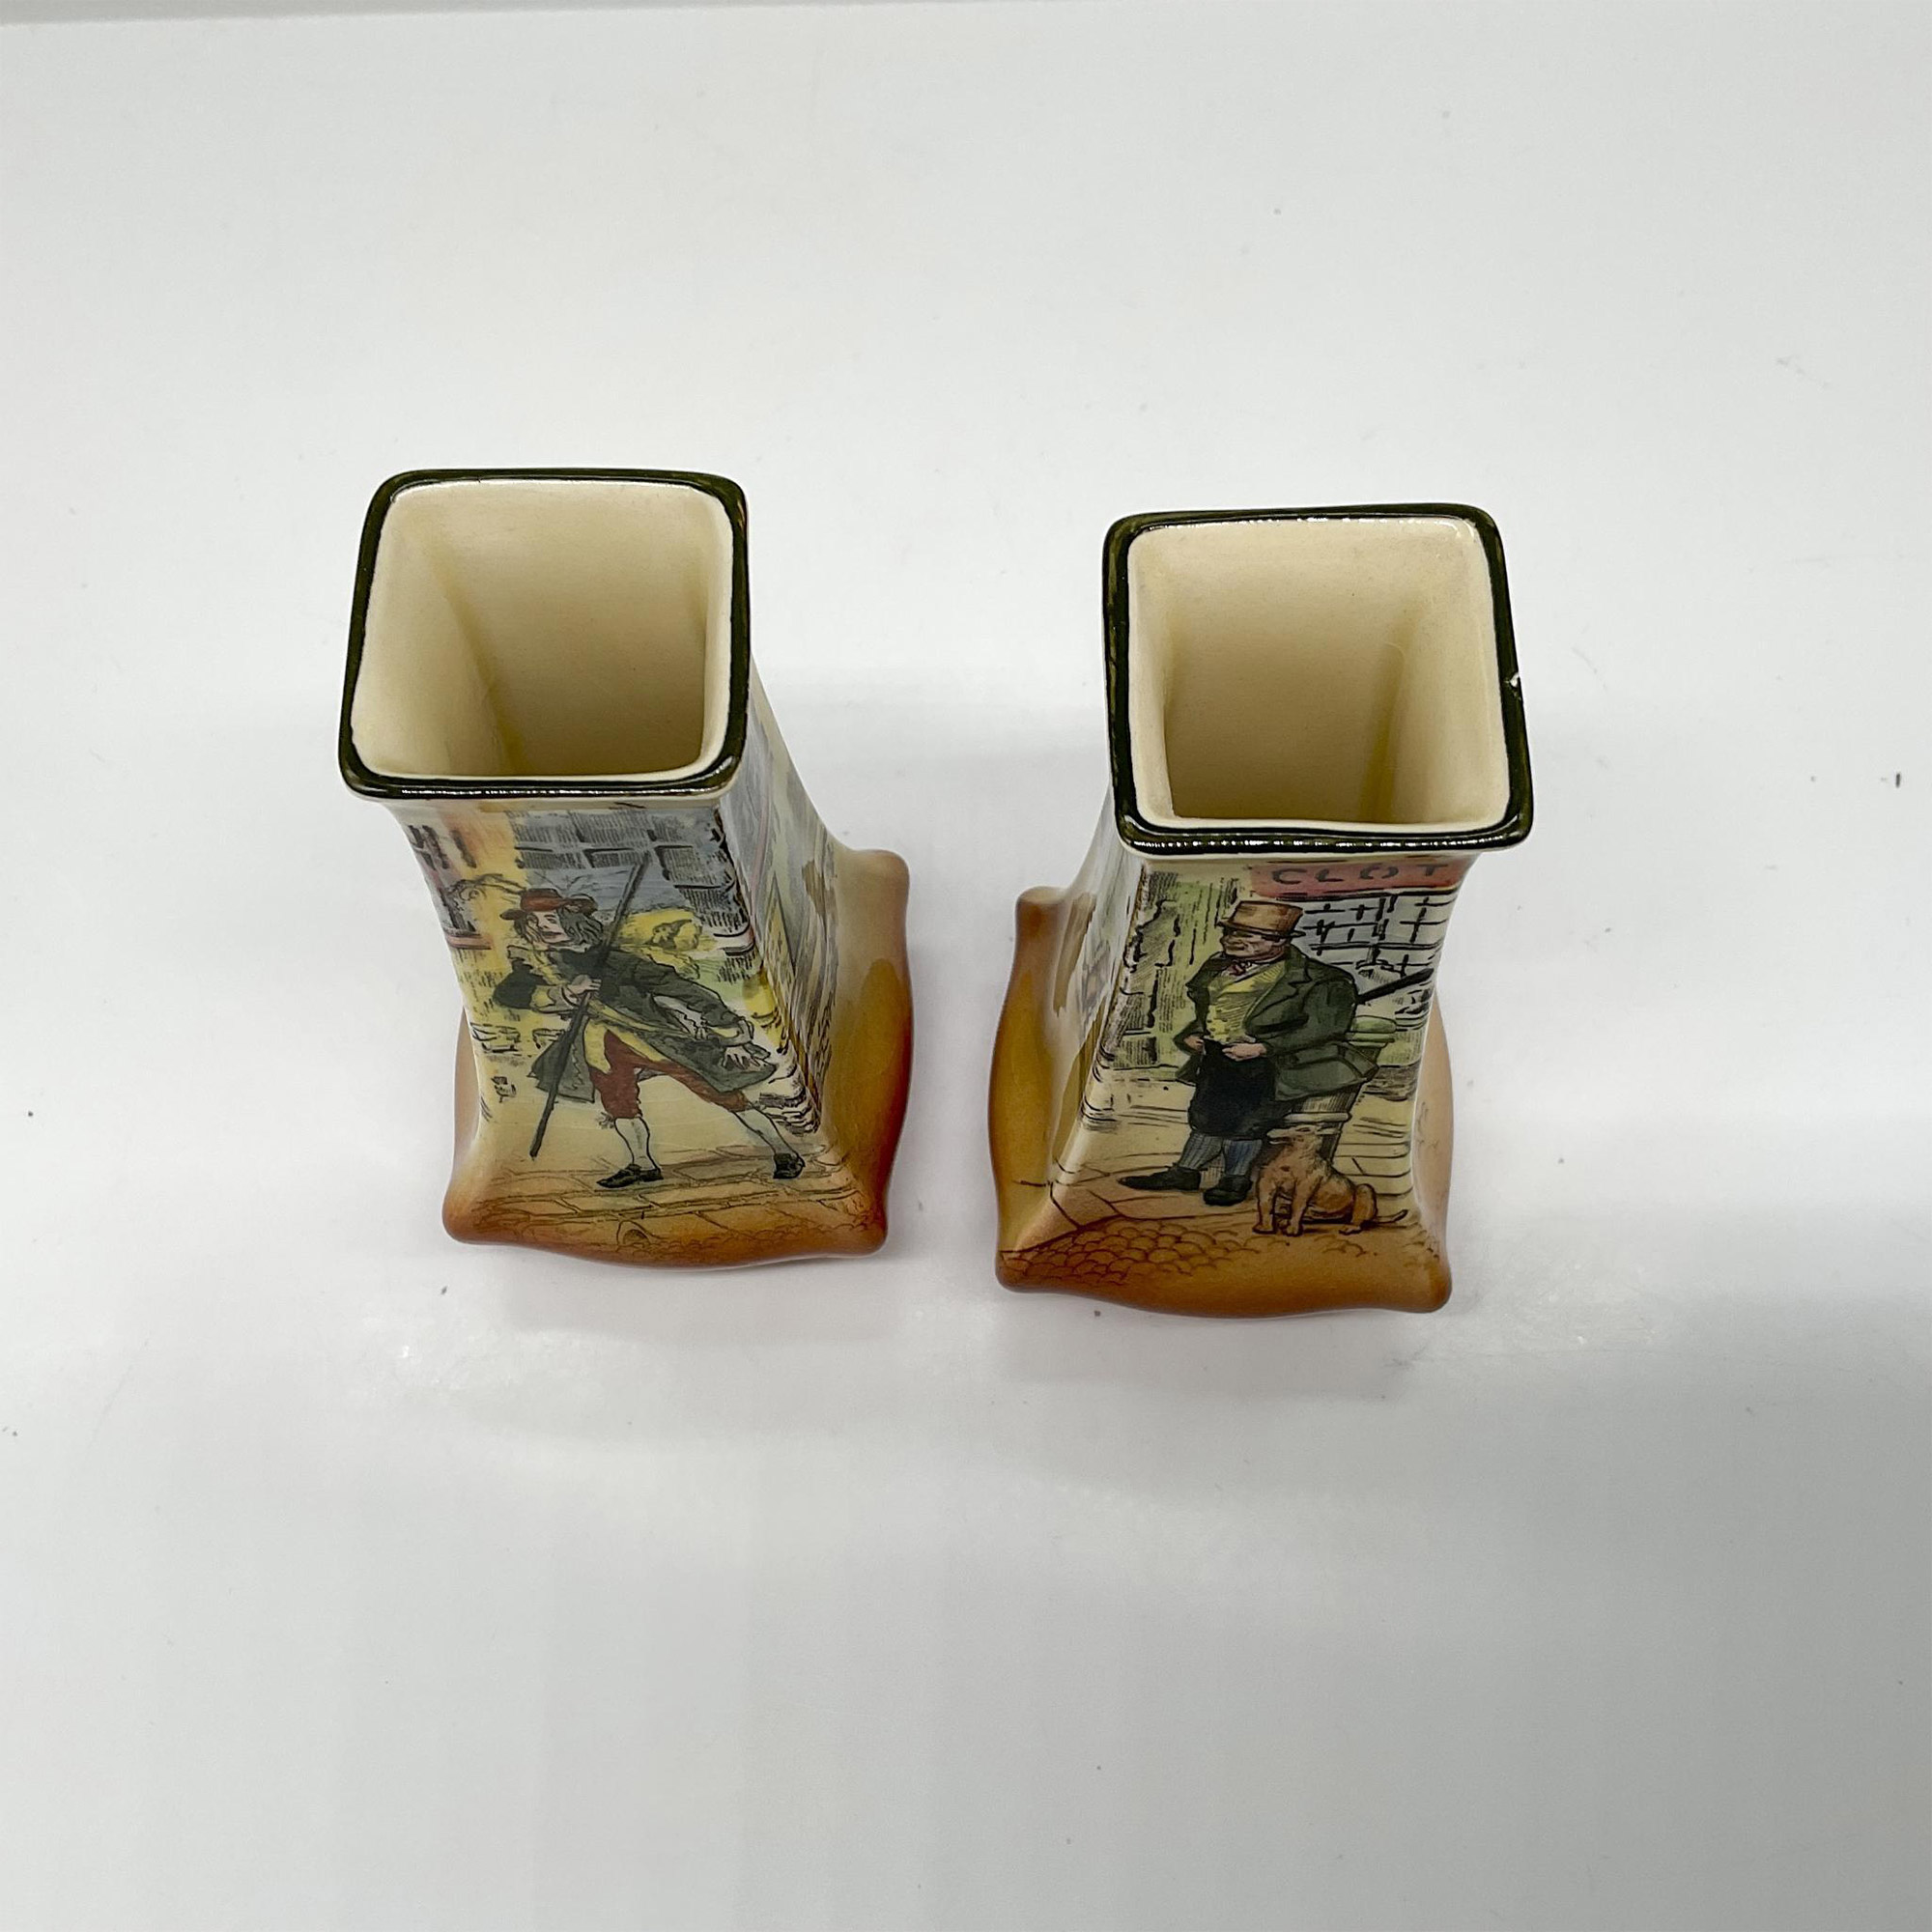 Pair of Royal Doulton Dickens Ware Bud Vases - Image 2 of 4